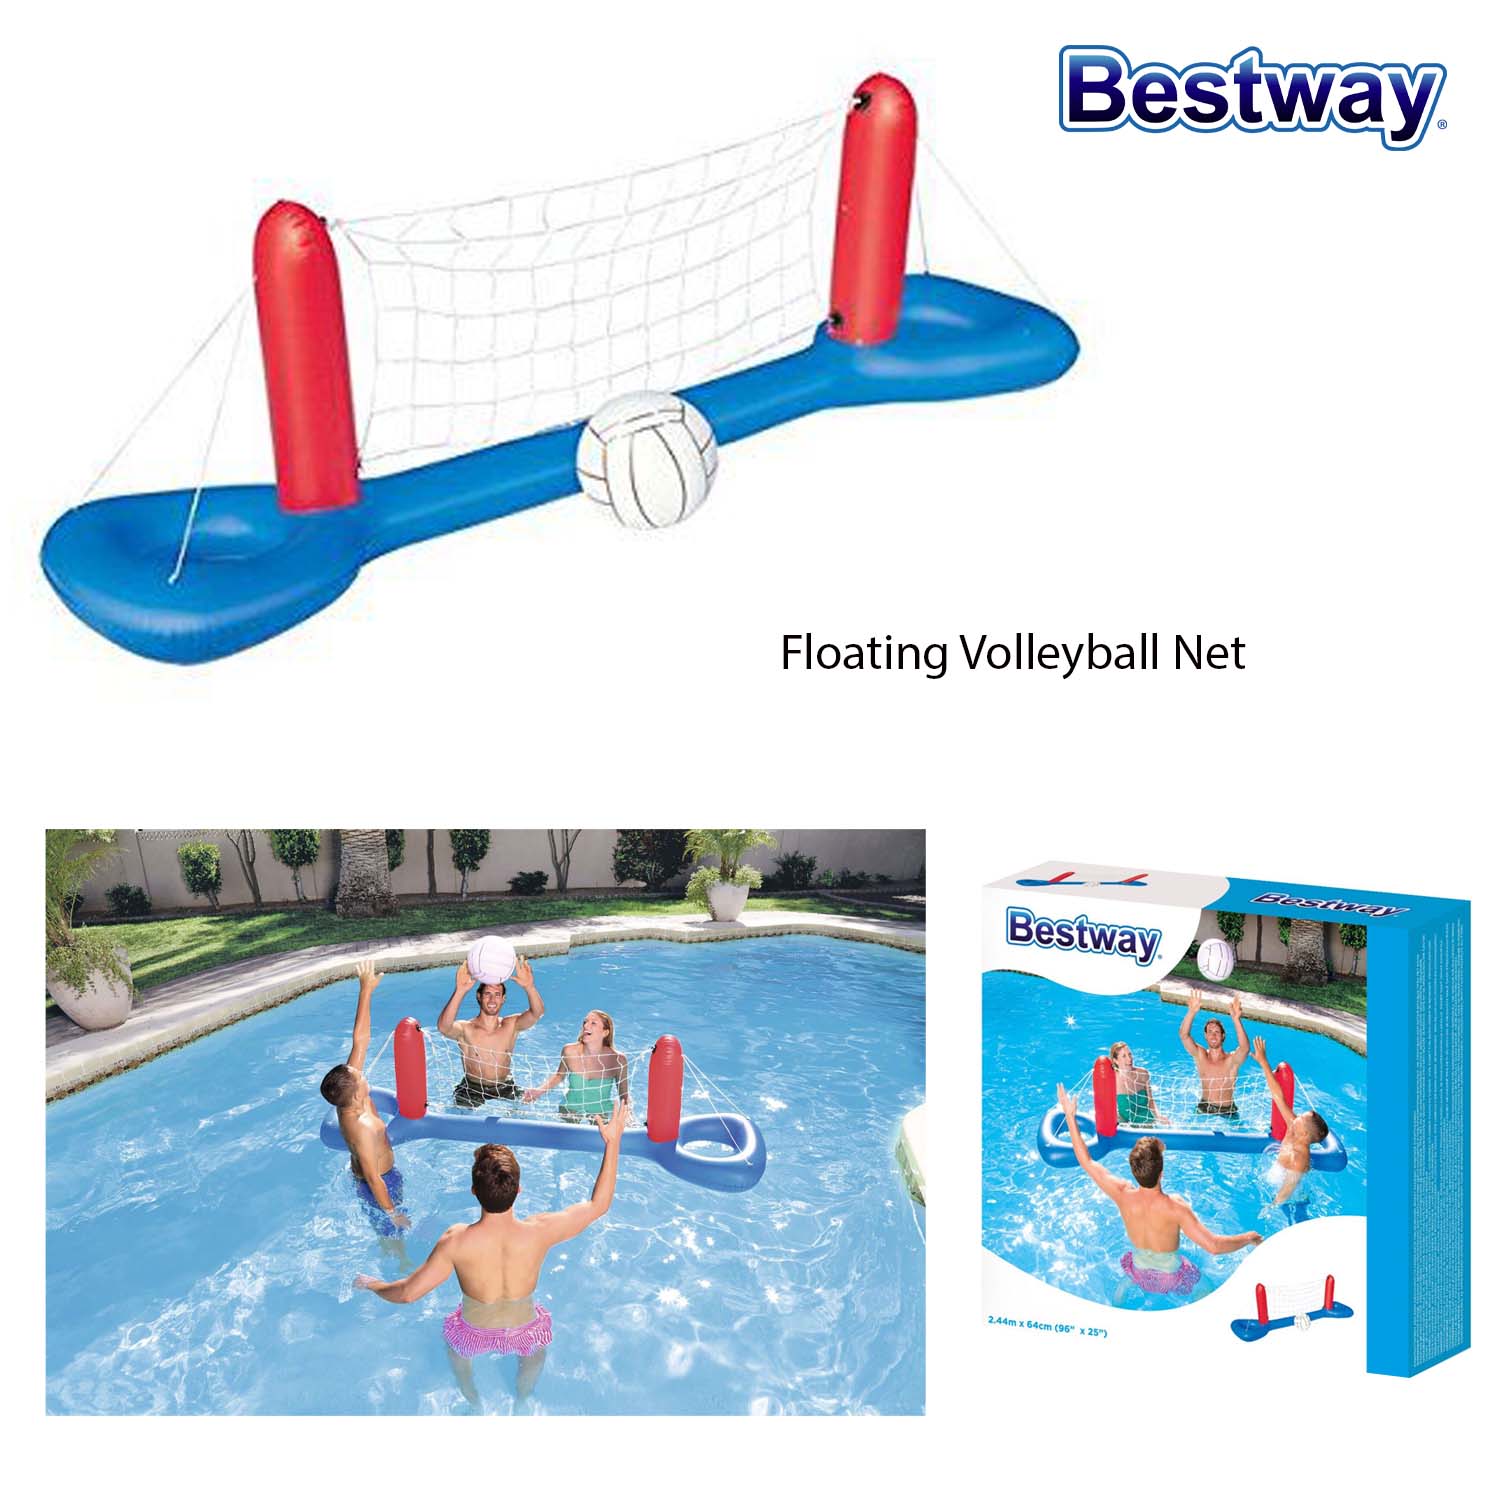 Bestway Inflatable Floating Volleyball Net Summer Pool Game | eBay